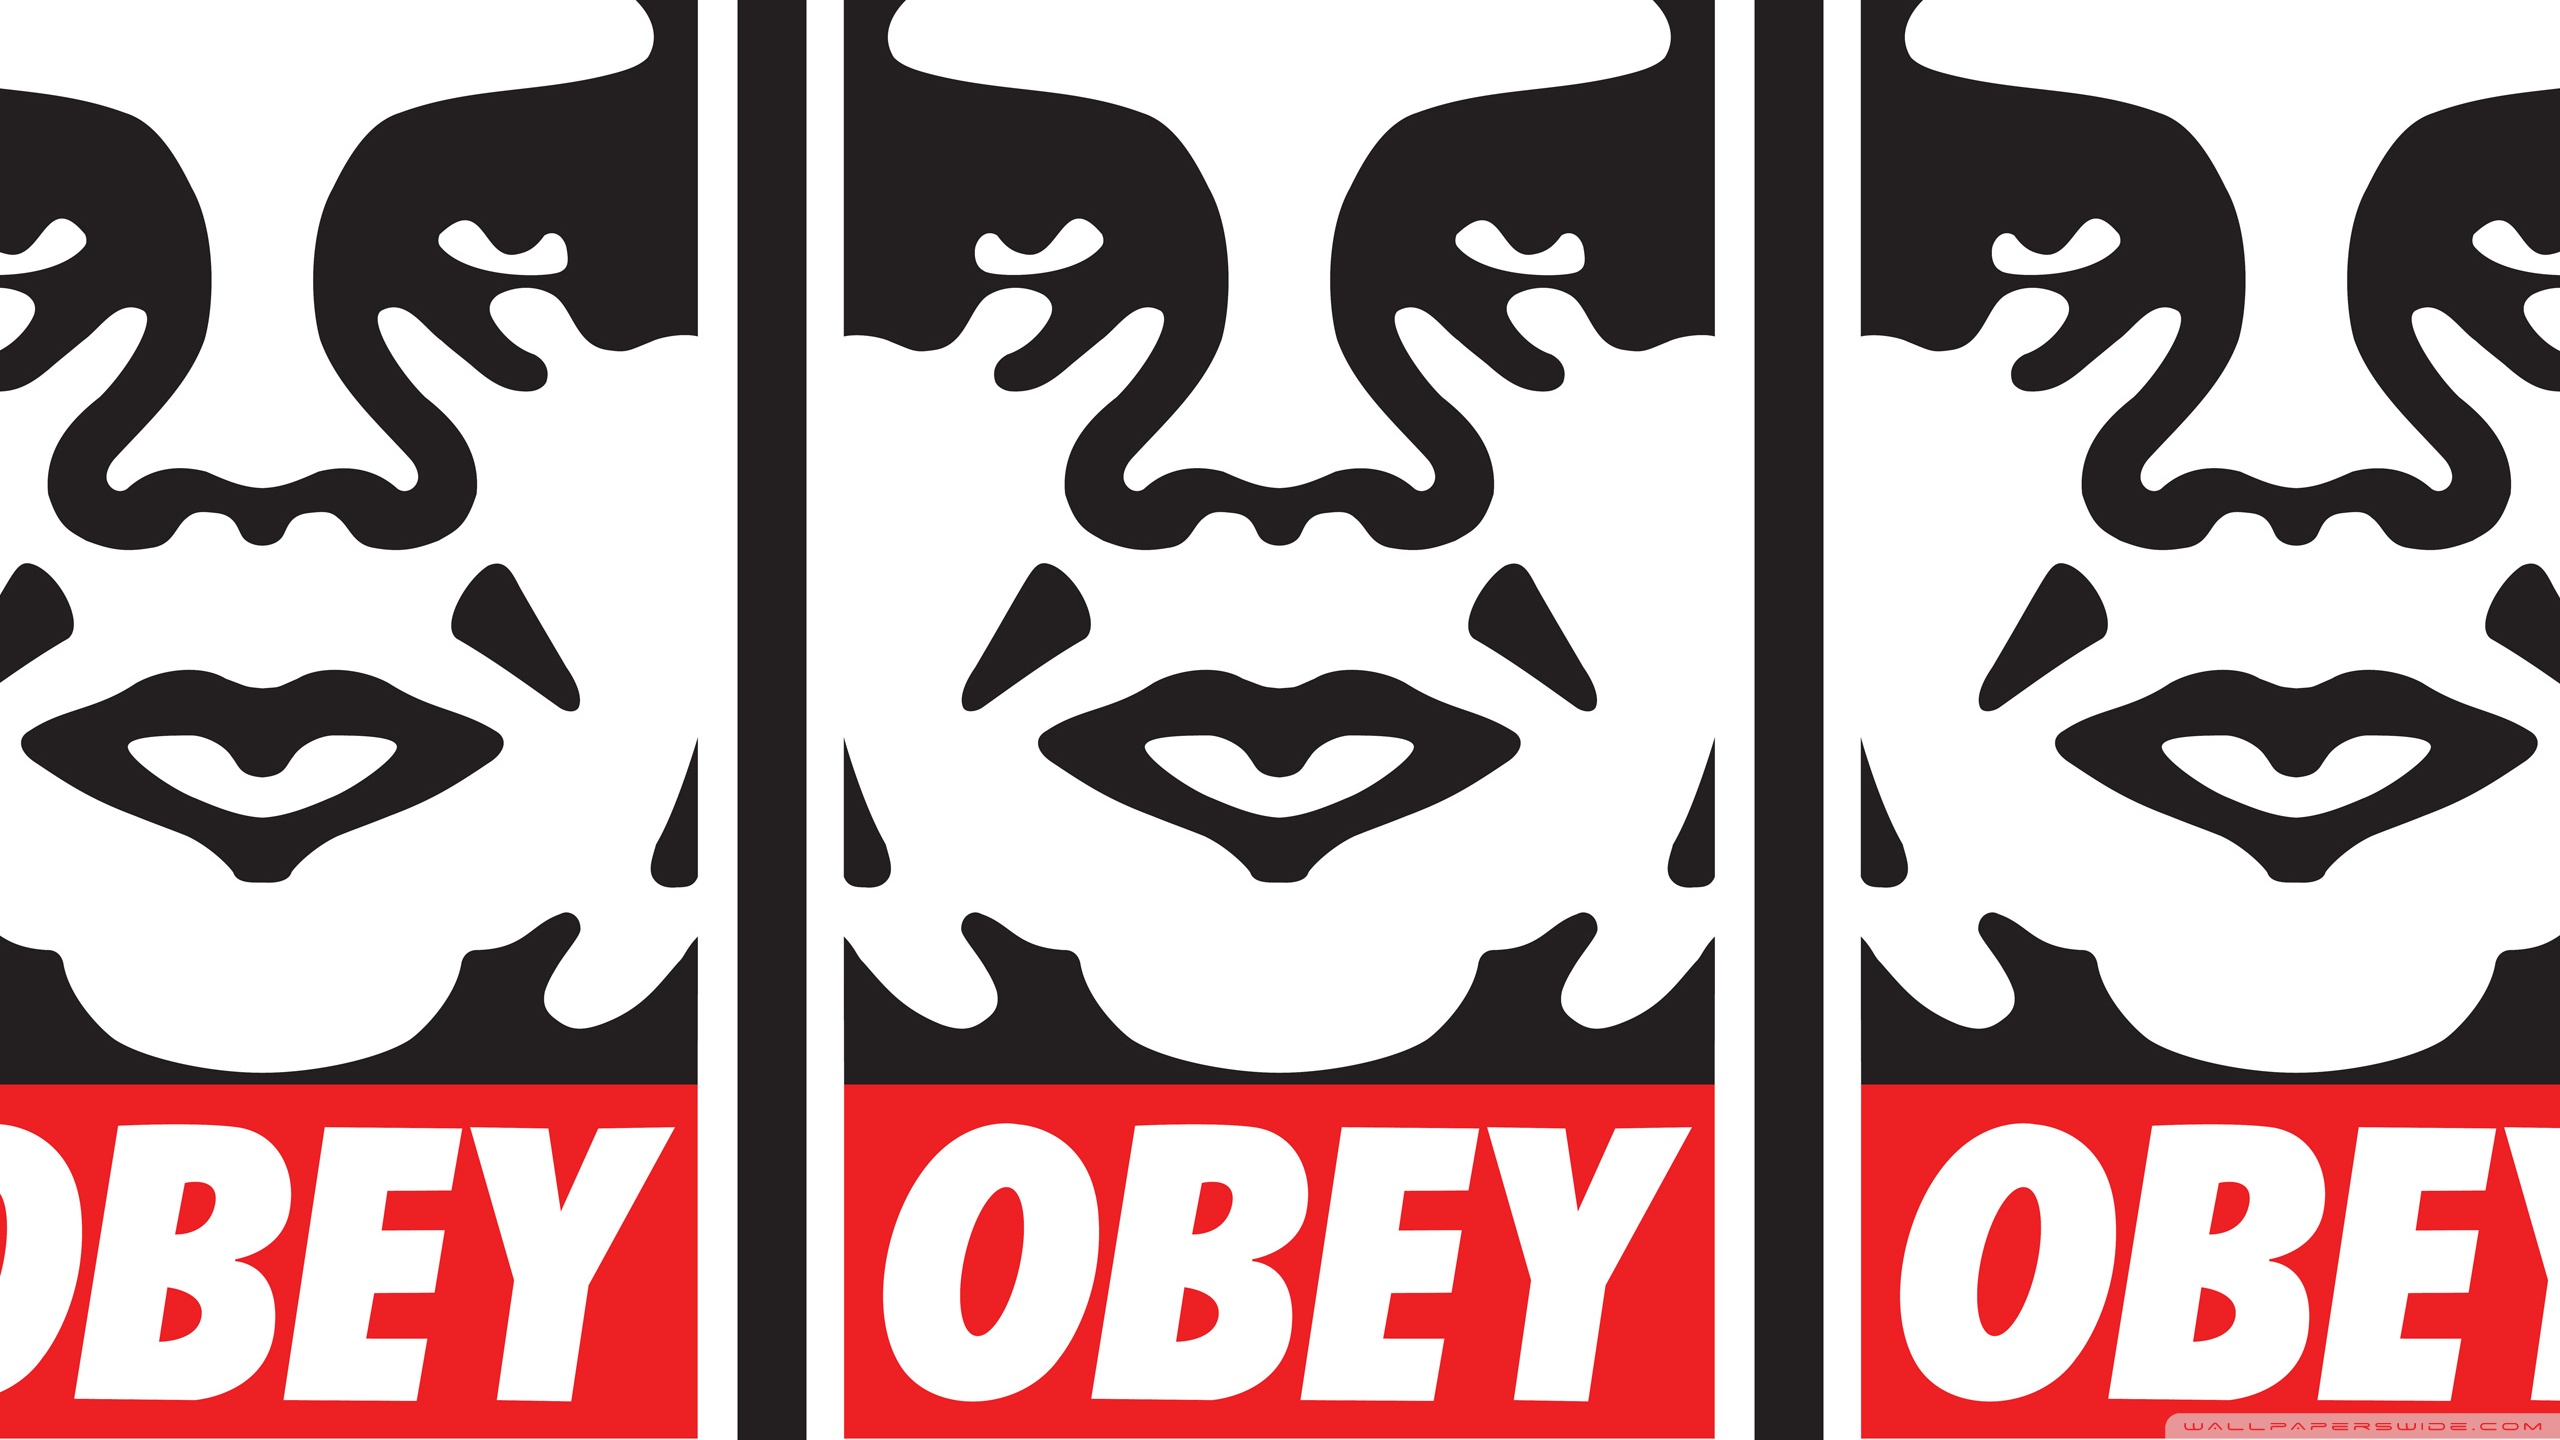 Obey Logo Wallpapers